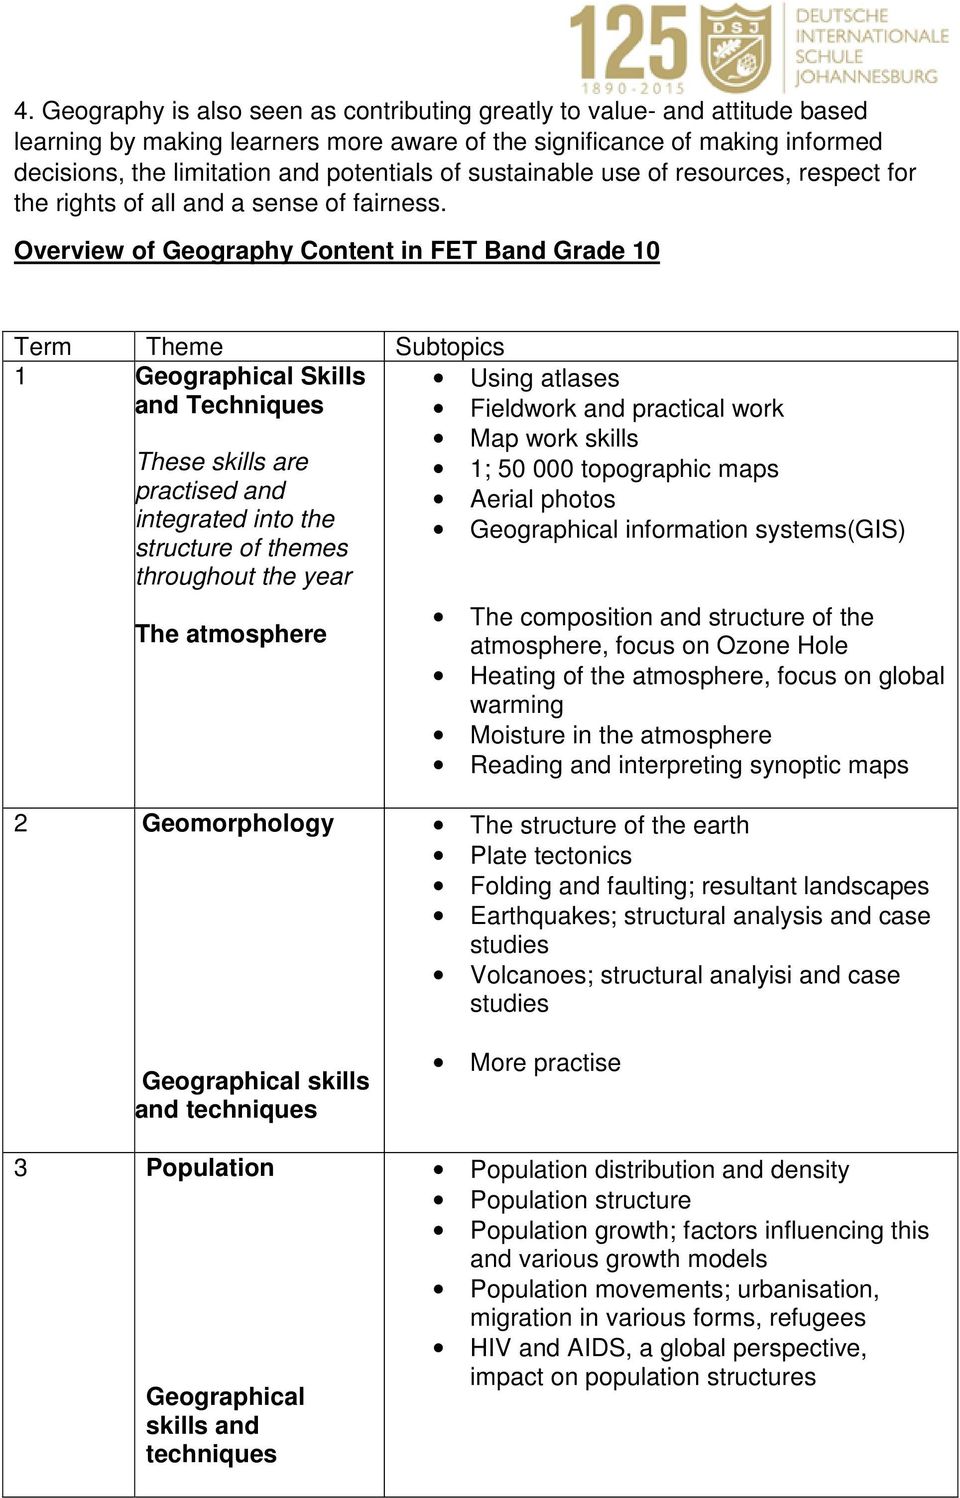 Overview of Content in FET Band Grade 10 1 Skills and Techniques The atmosphere Fieldwork and practical work information systems(gis) The composition and structure of the atmosphere, focus on Ozone